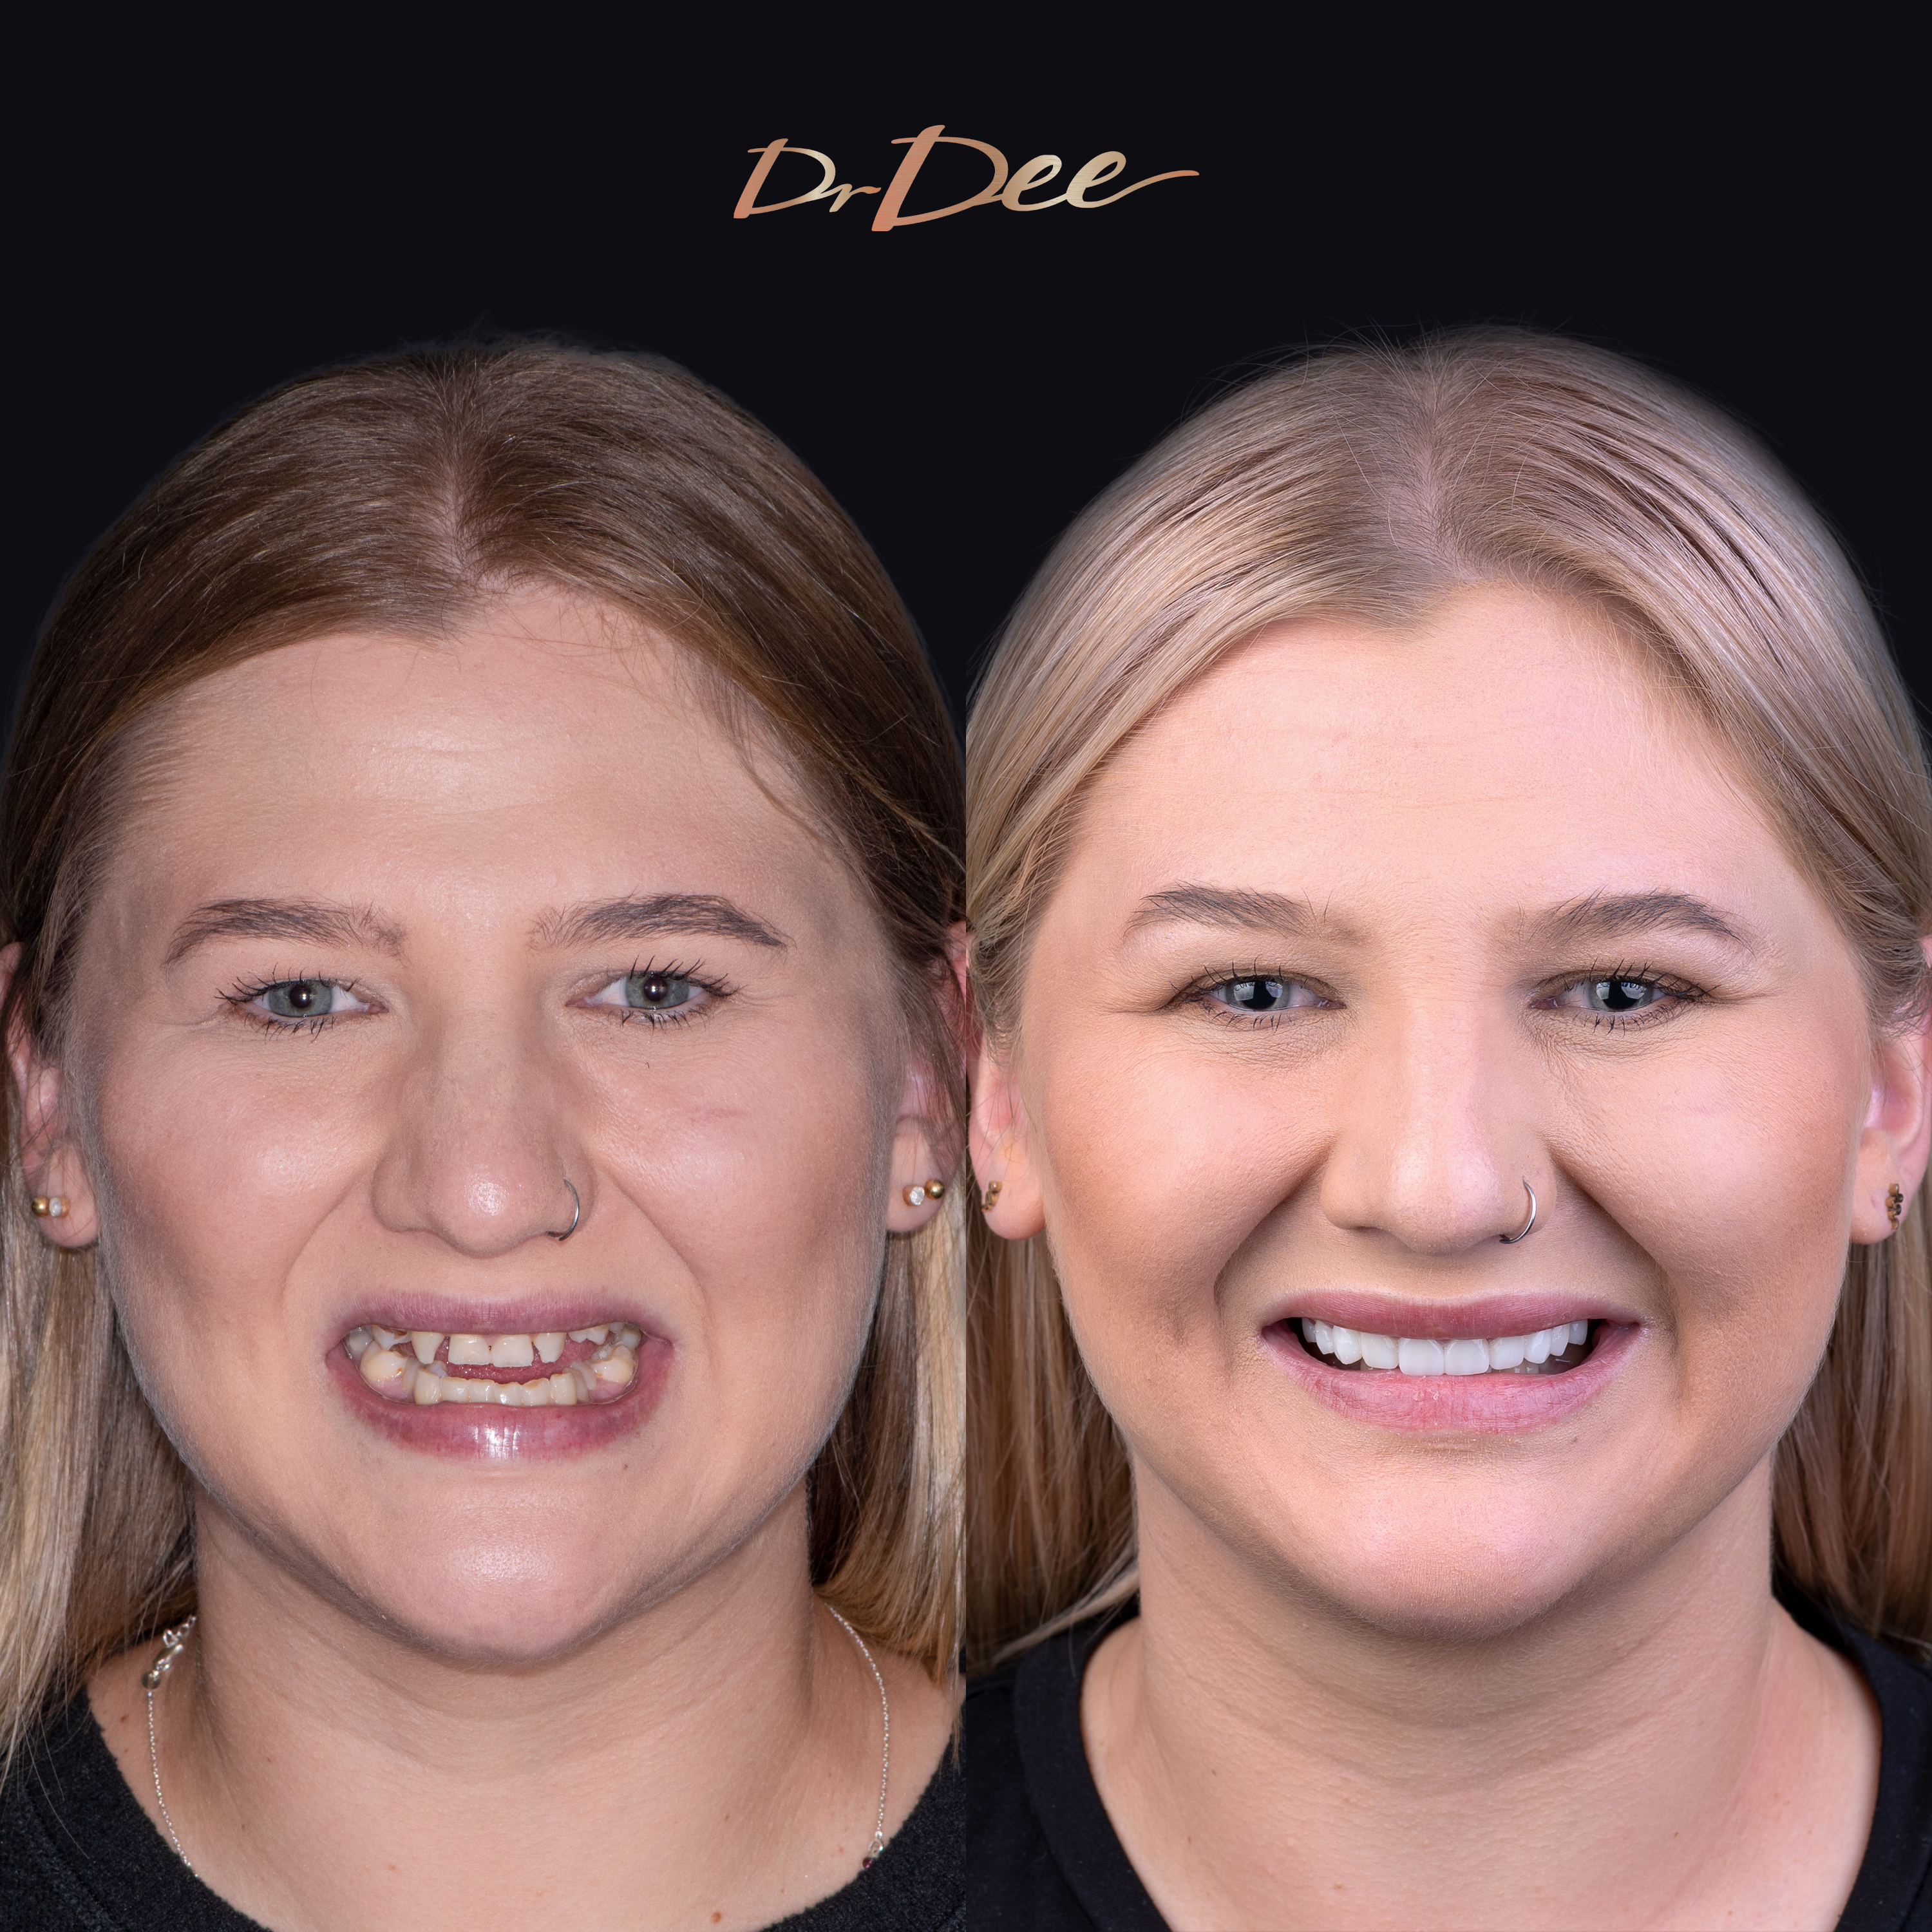 Shai before and after smile makeover for gappy smile at Vogue Dental Studios